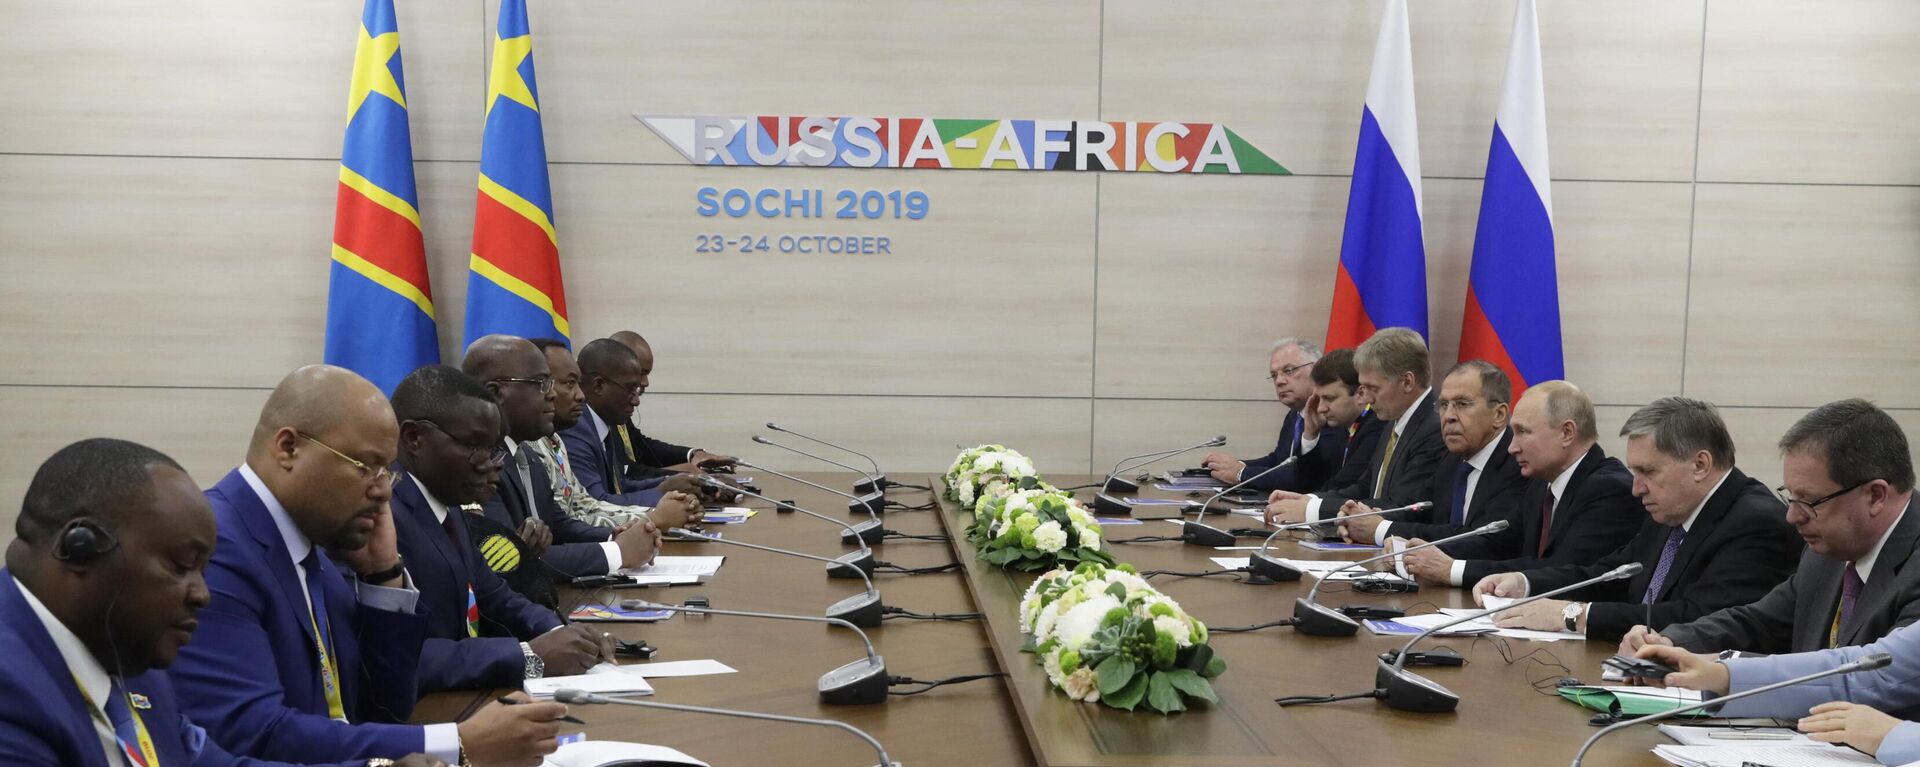 Russian President Vladimir Putin (3R) meets with Fйlix Antoine Tshilombo Tshisekedi (4L), President, Democratic Republic of the Congo, on the sidelines of the 2019 Russia-Africa Summit in Sochi on October 23, 2019. - Sputnik International, 1920, 04.02.2023